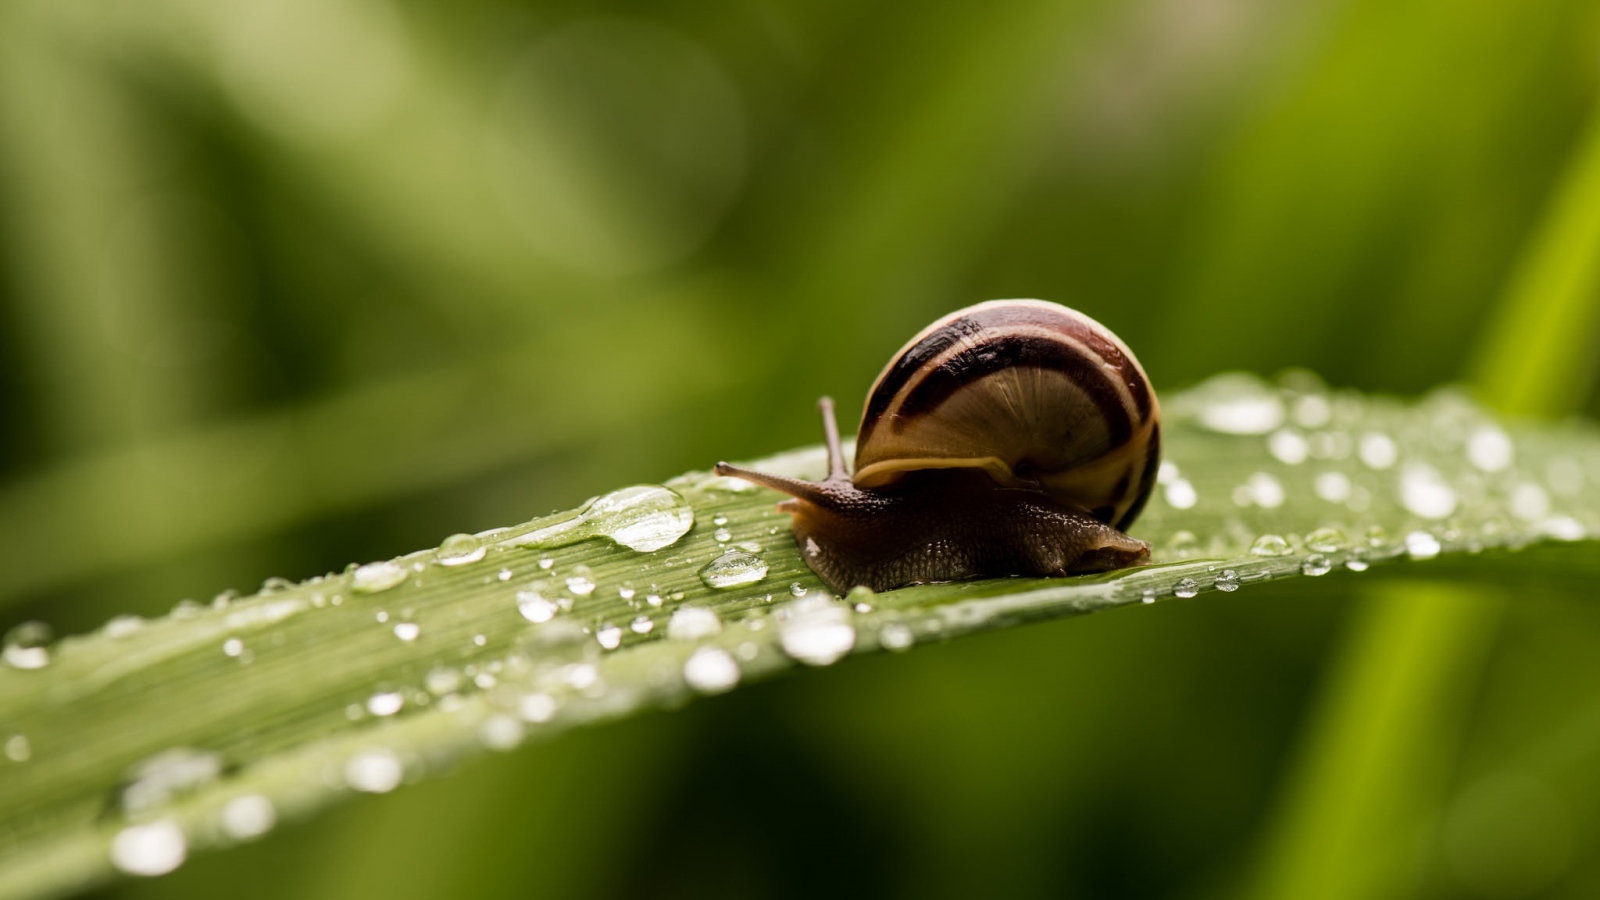 A snail sits on a dew-covered green leaf